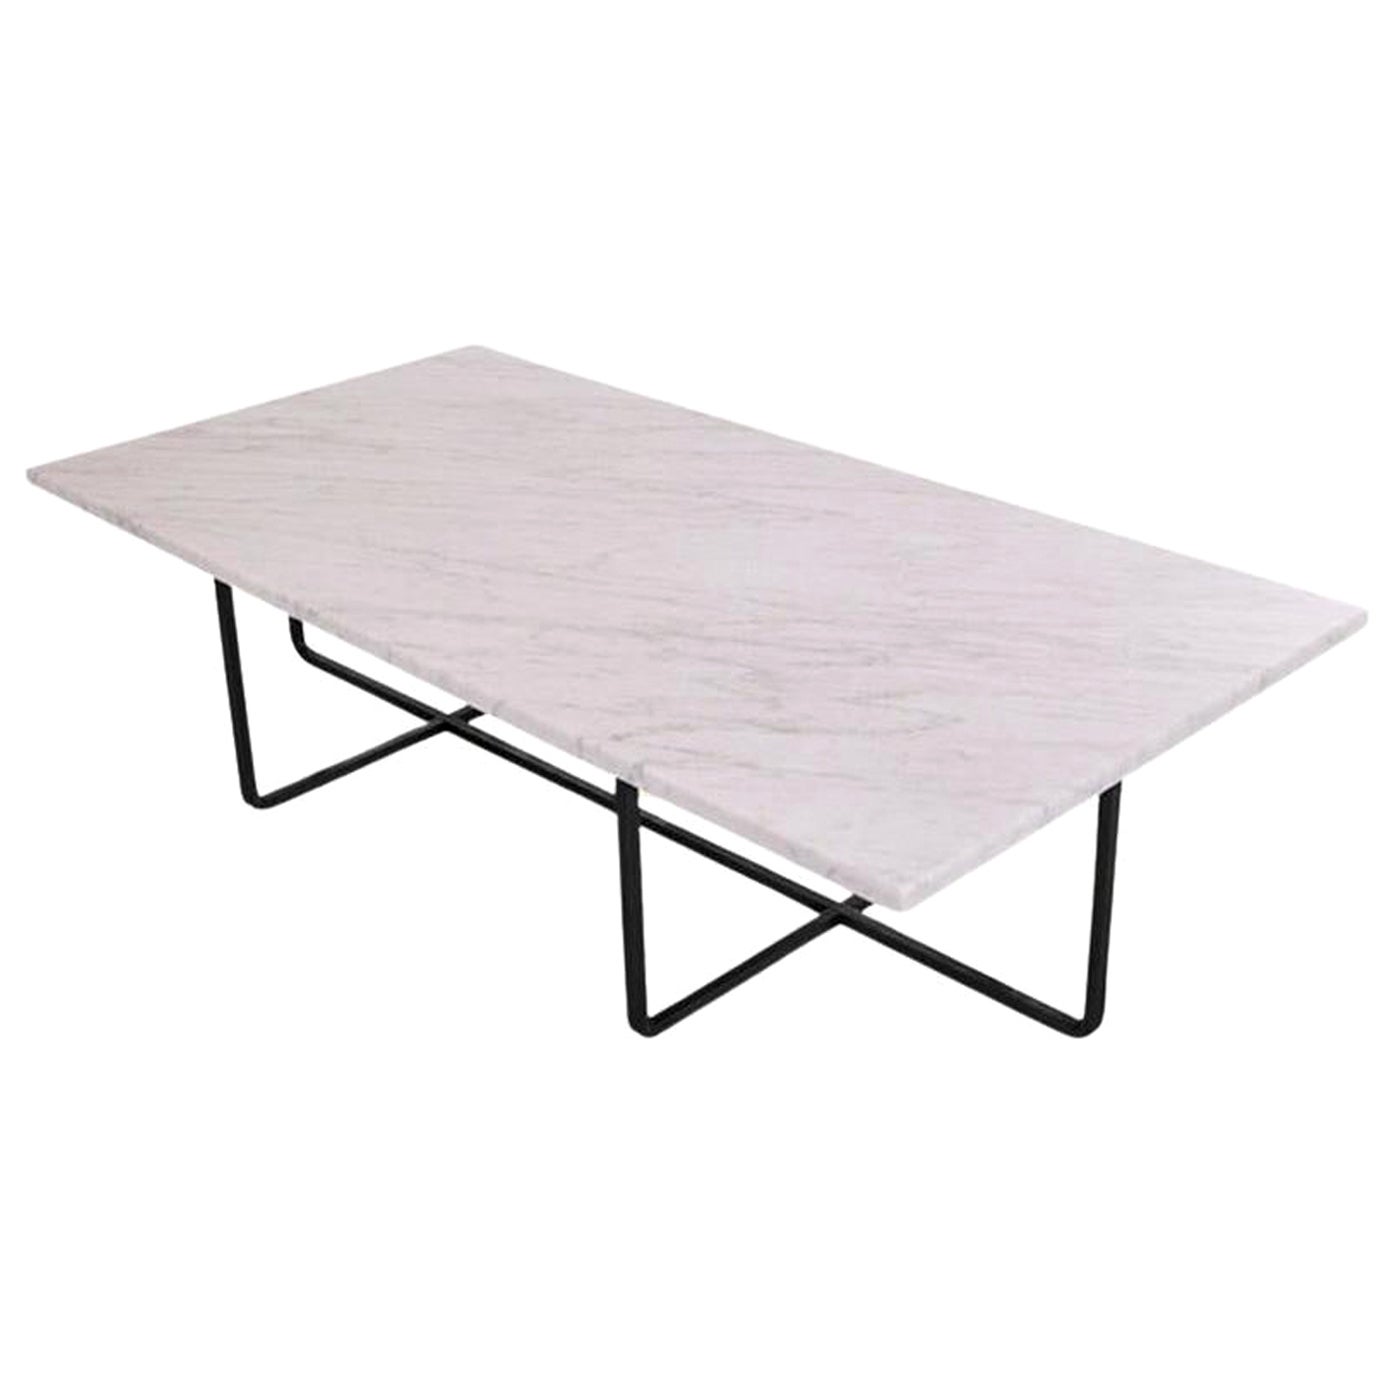 White Carrara Marble and Black Steel Large Ninety Table by Ox Denmarq For Sale